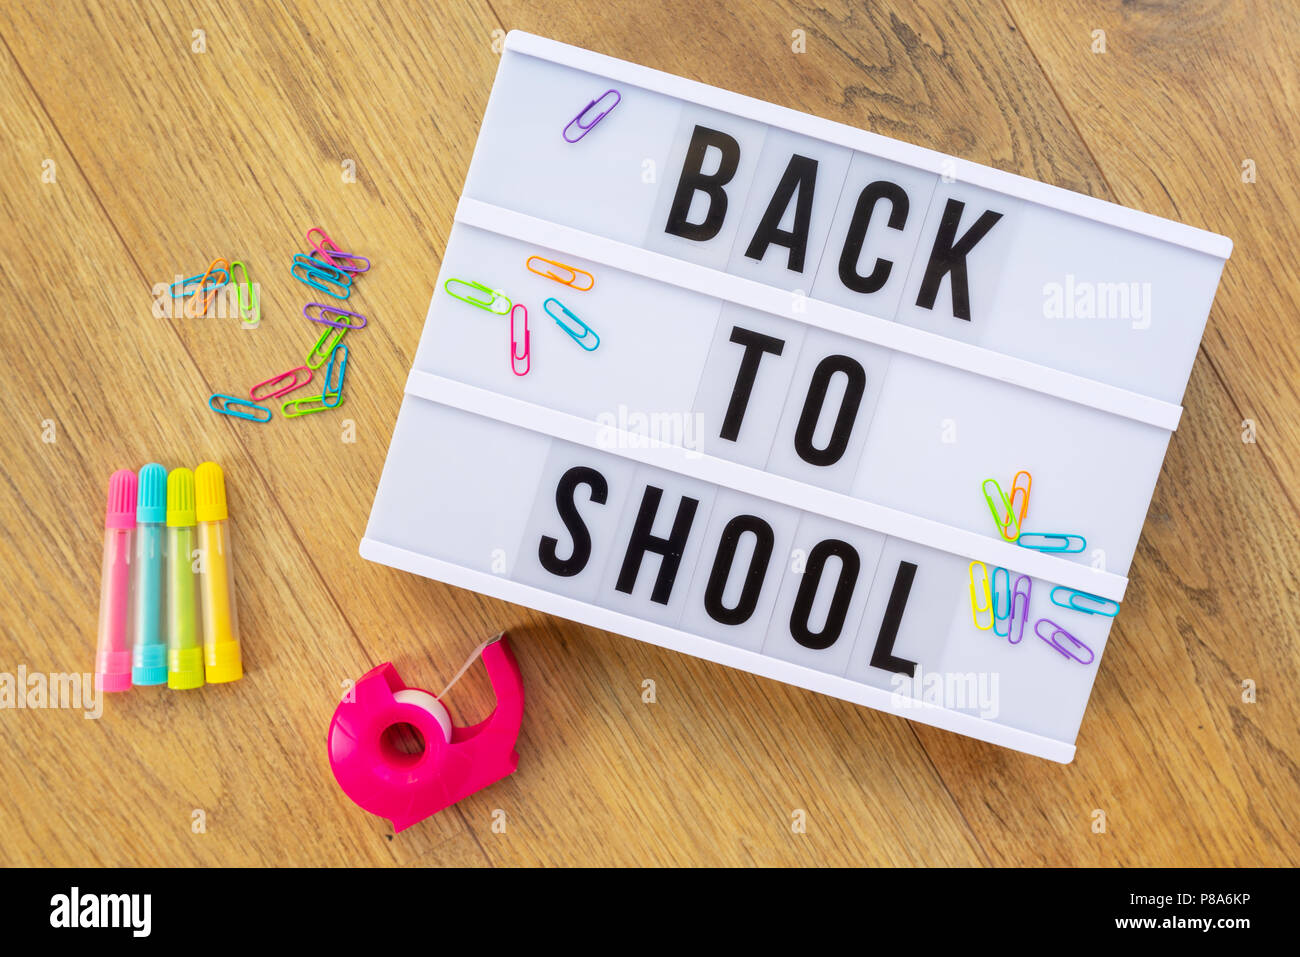 Back to school written on a modern light box on wood background, colorful supplies Stock Photo